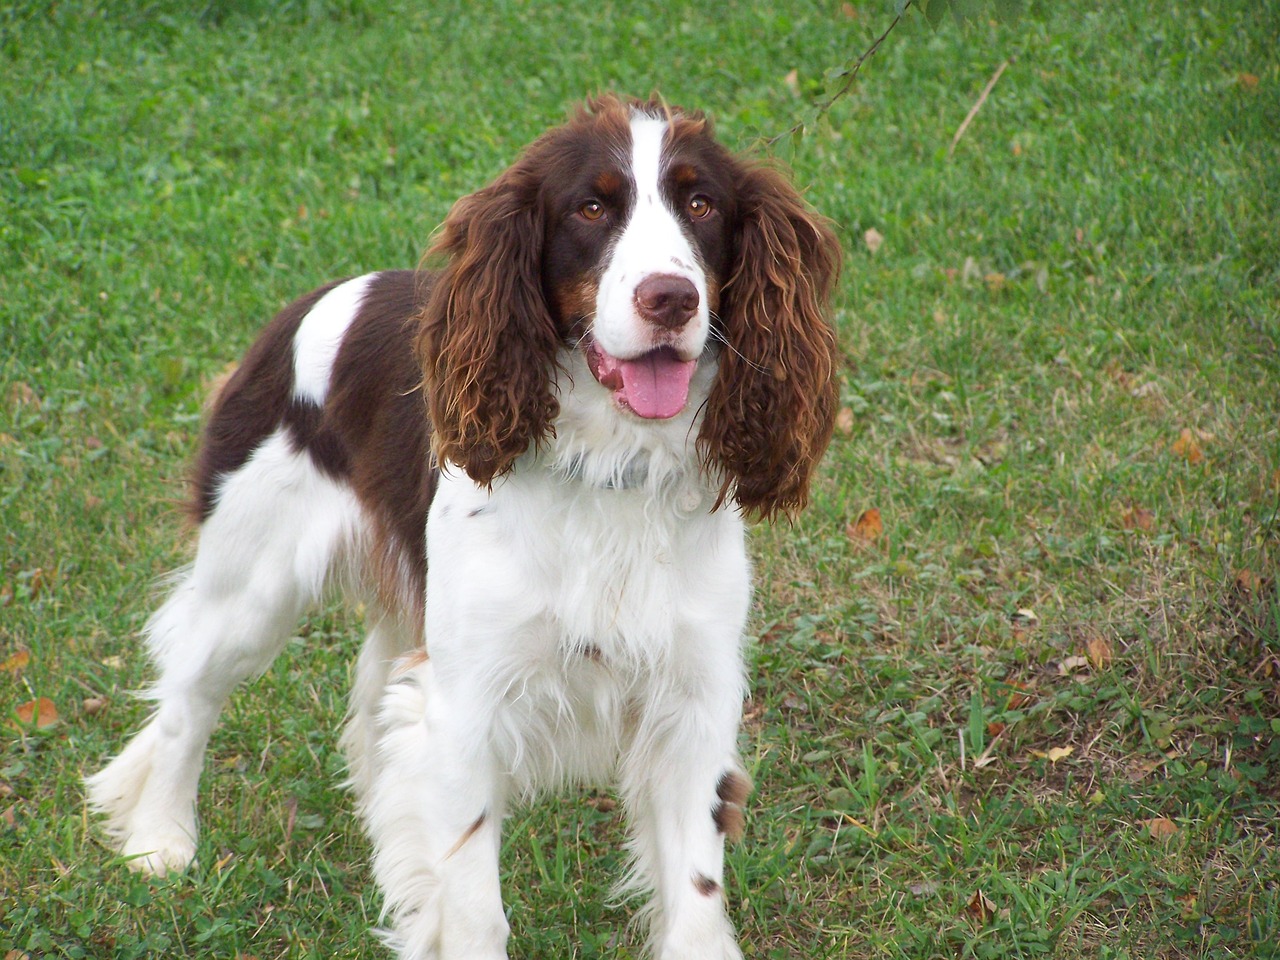 7 Facts About English Springer Spaniels You Probably Didn’t Know